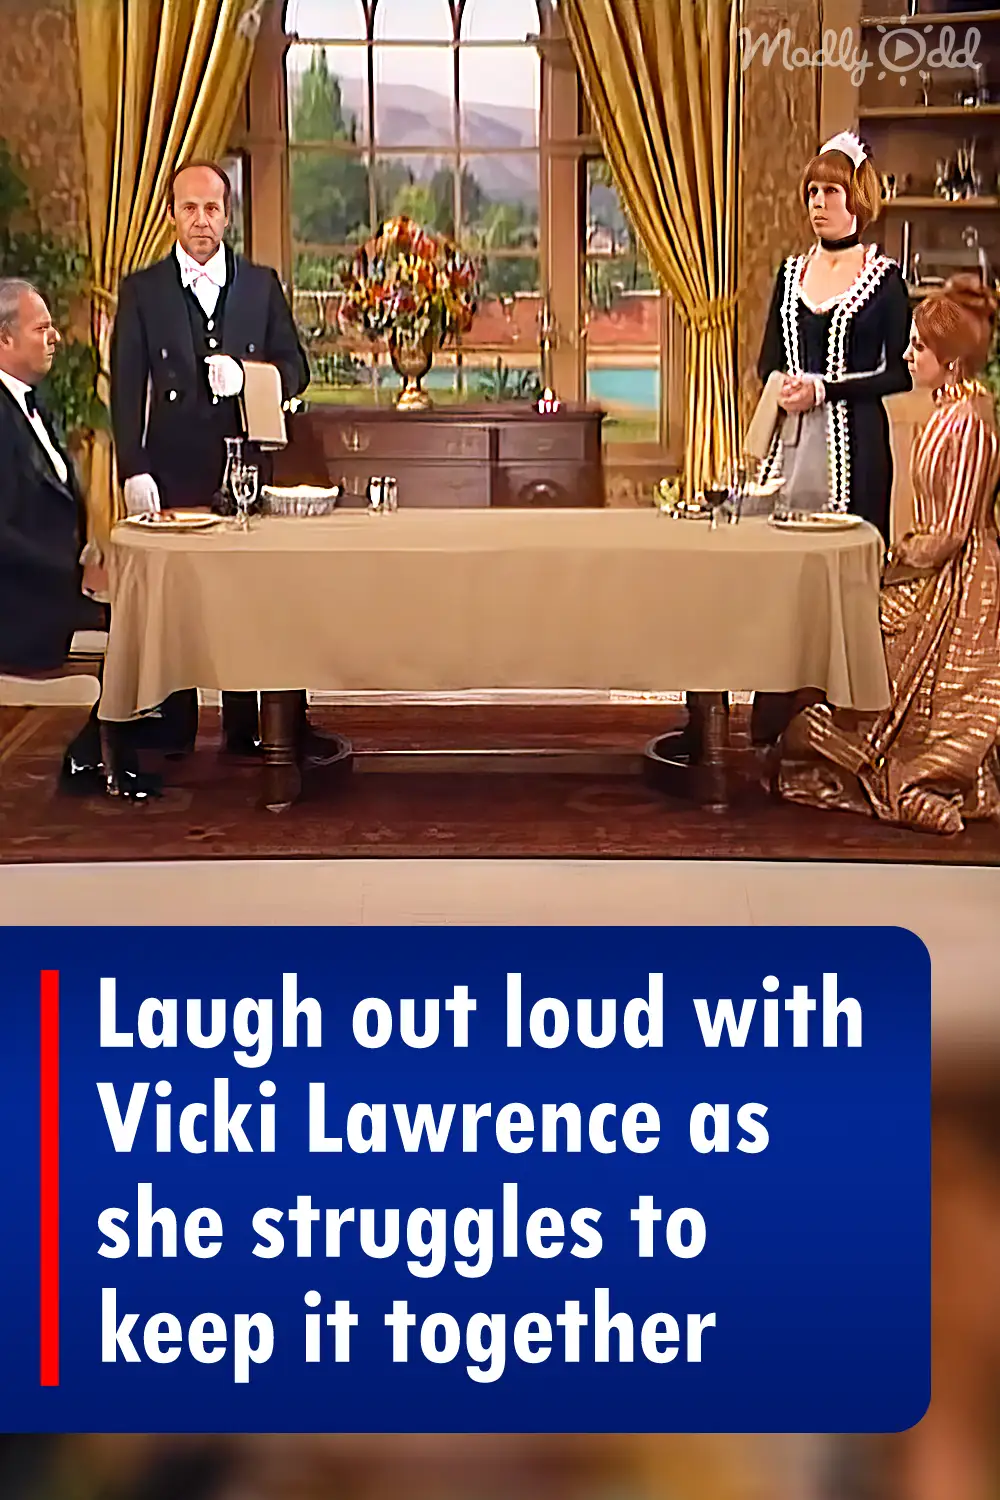 Laugh out loud with Vicki Lawrence as she struggles to keep it together